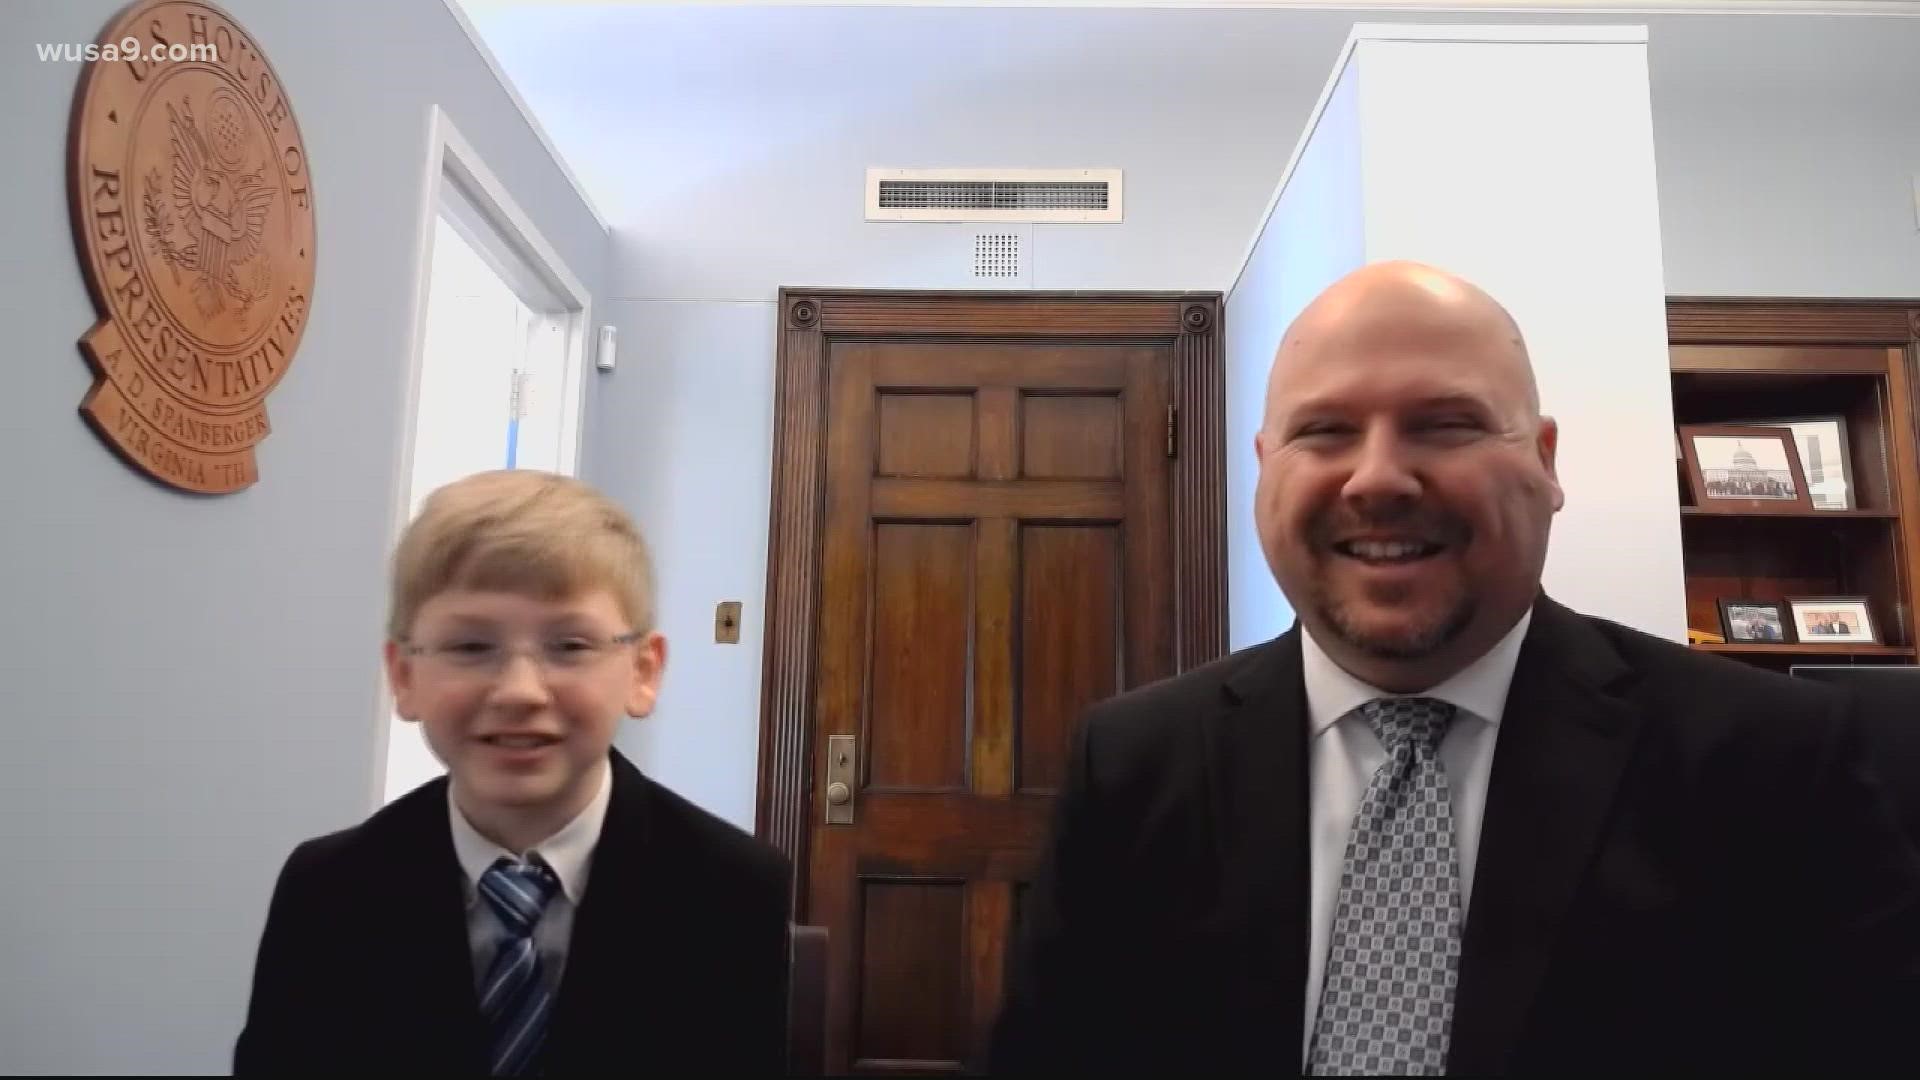 Davis is from Midlothian, Virginia and he was a guest at Biden's first SOTU. Joshua and his dad have Type 1 diabetes and Biden is working to bring insulin cost down.